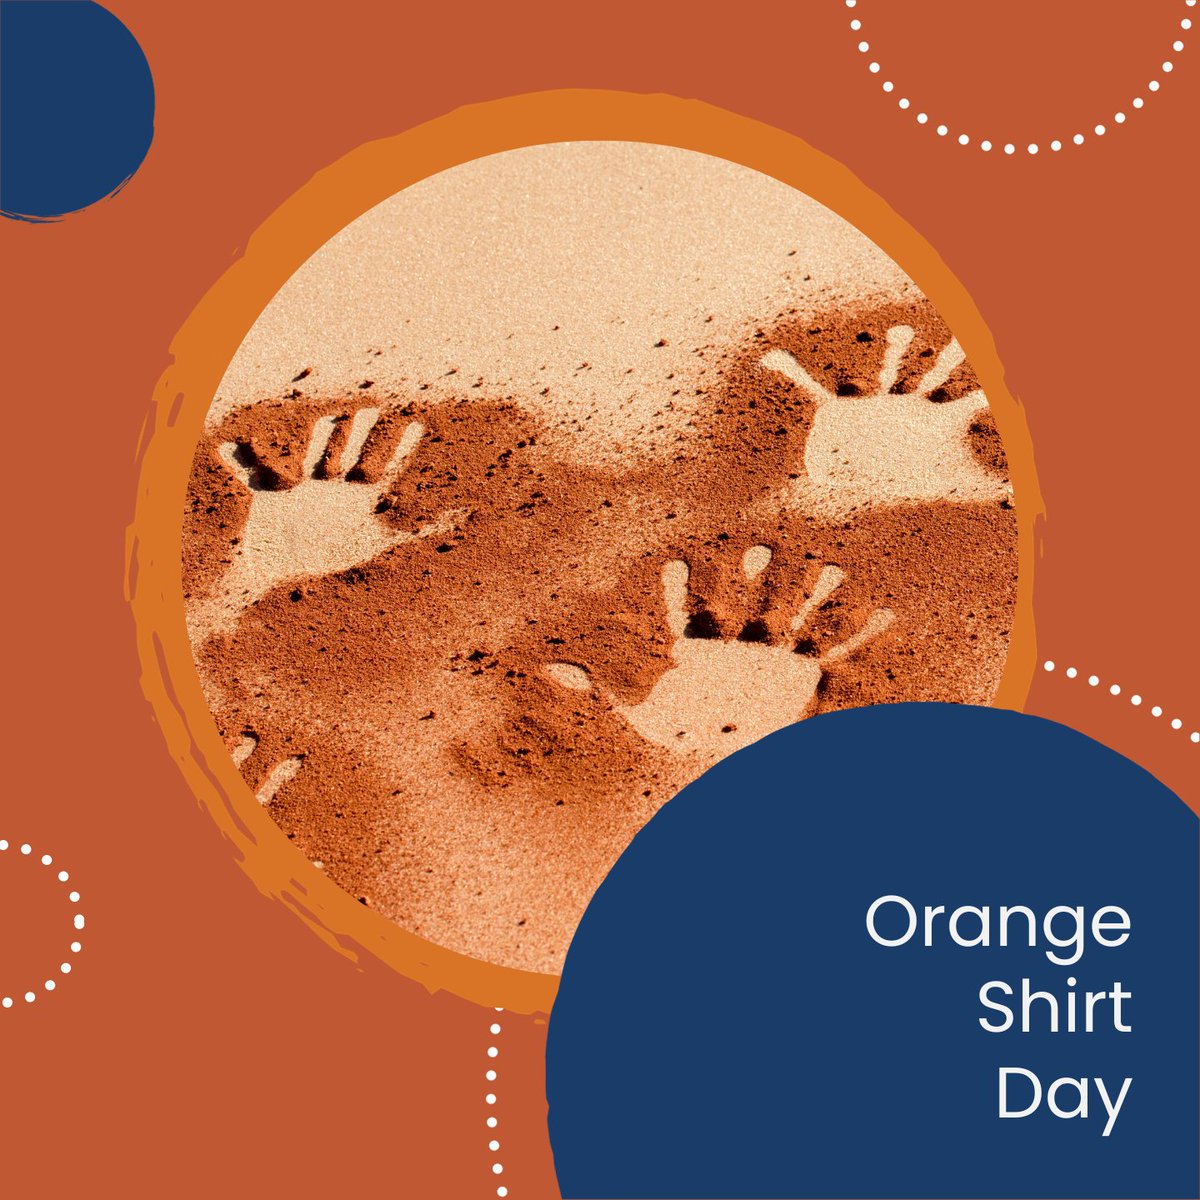 Today is Orange Shirt Day, a grassroots movement to raise awareness of the impacts of residential schools on survivors, their families, and the ongoing intergenerational impacts. Read more about Orange Shirt Day orangeshirtday.org/phyllis-story/ #orangeshirtday #reconciliation